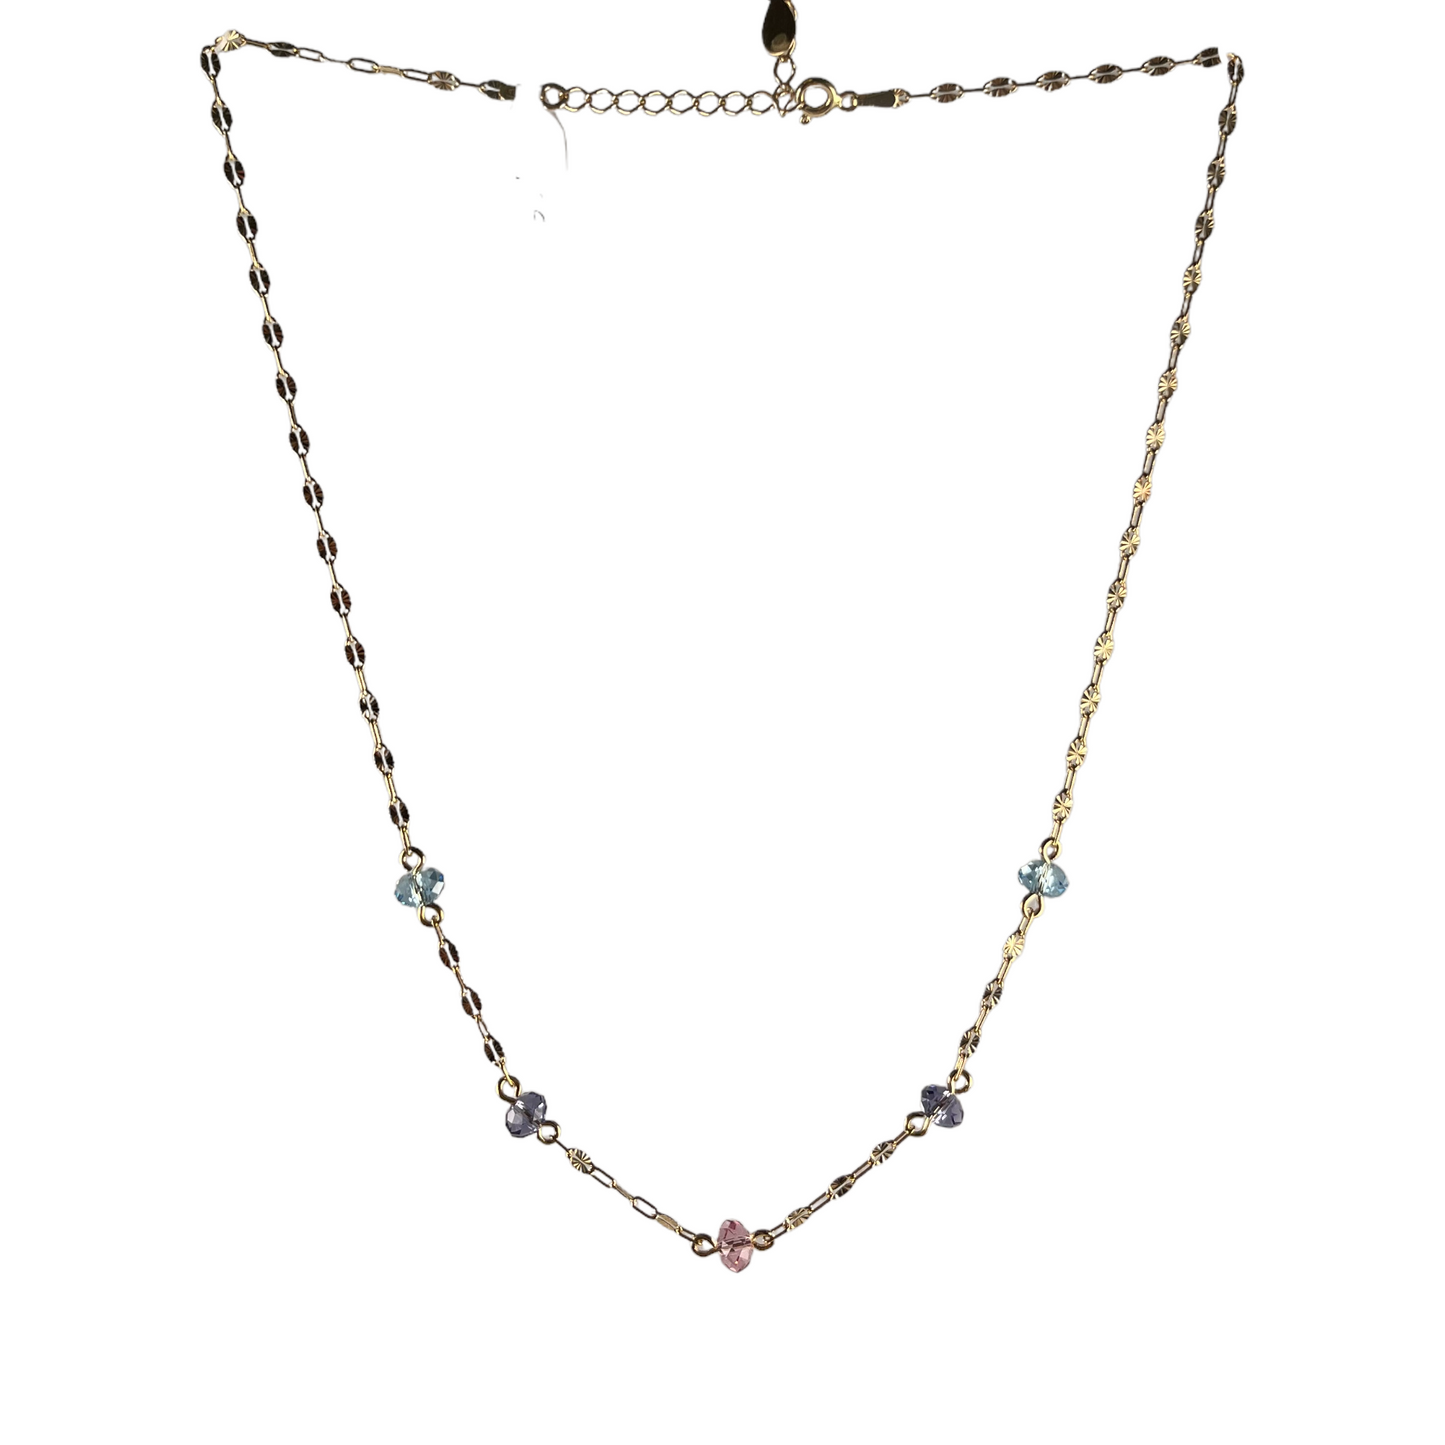 Necklace with Swarovski crystals, ELLA collection, J252, gold-plated silver